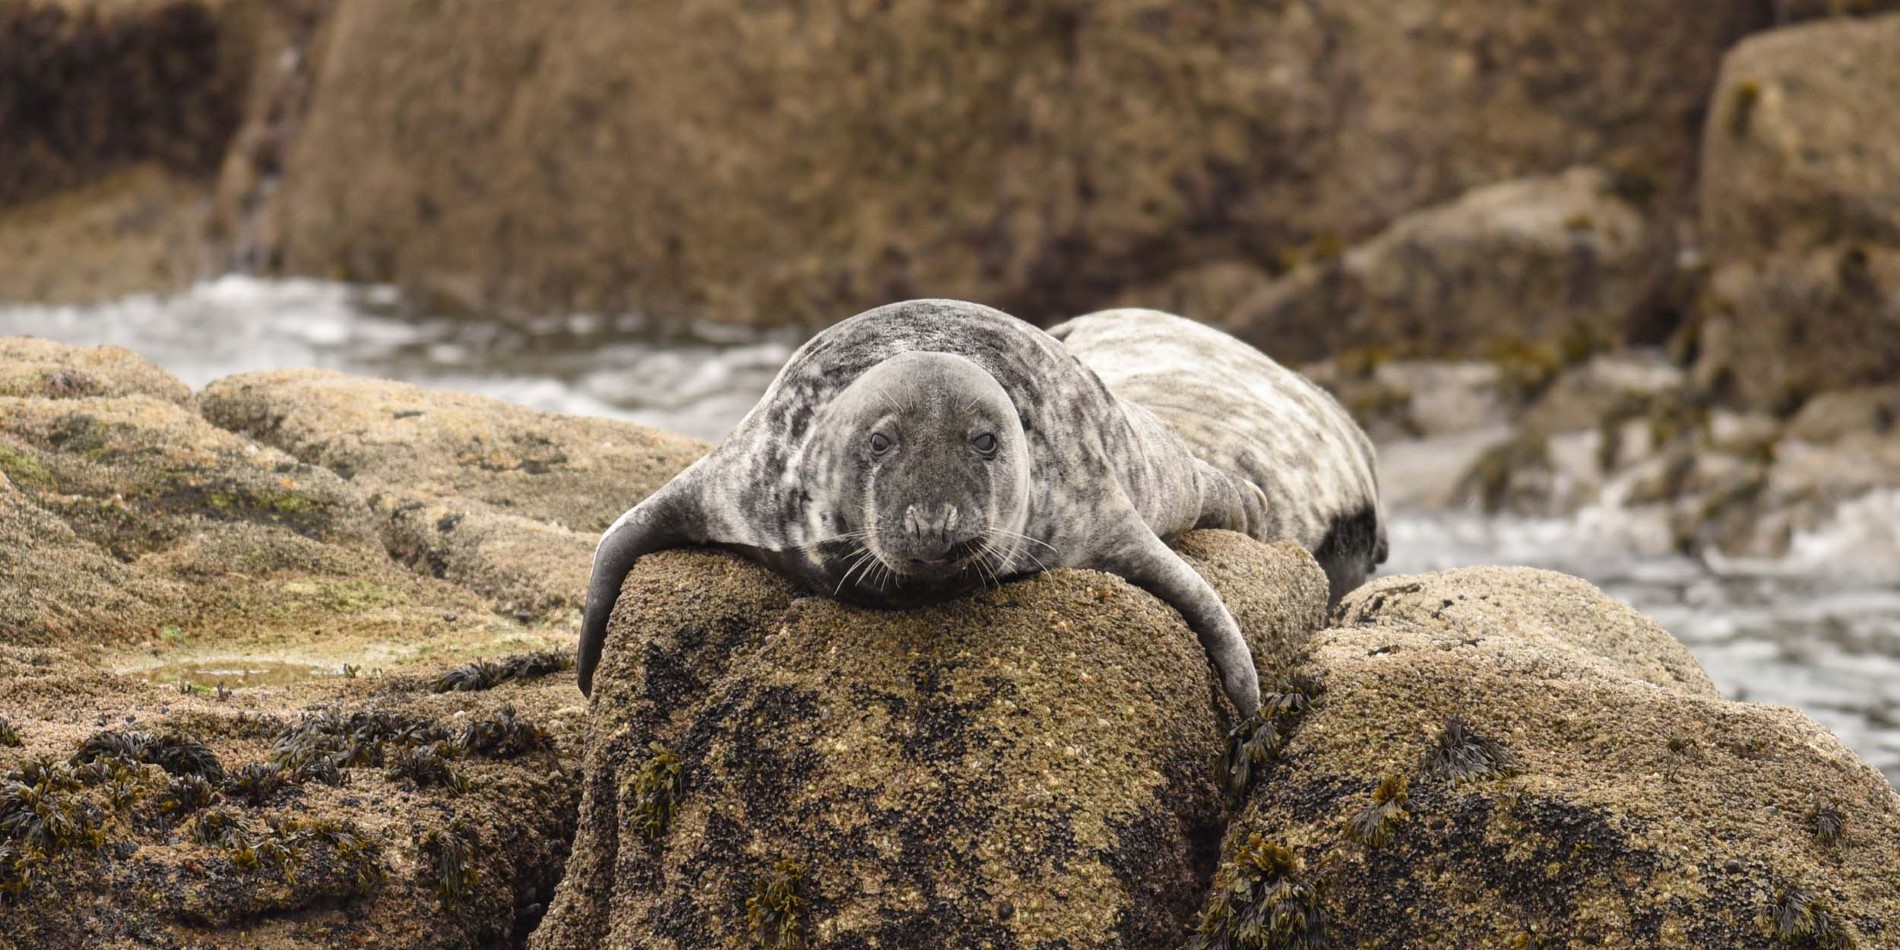 Scan for grey seals among the rocks.